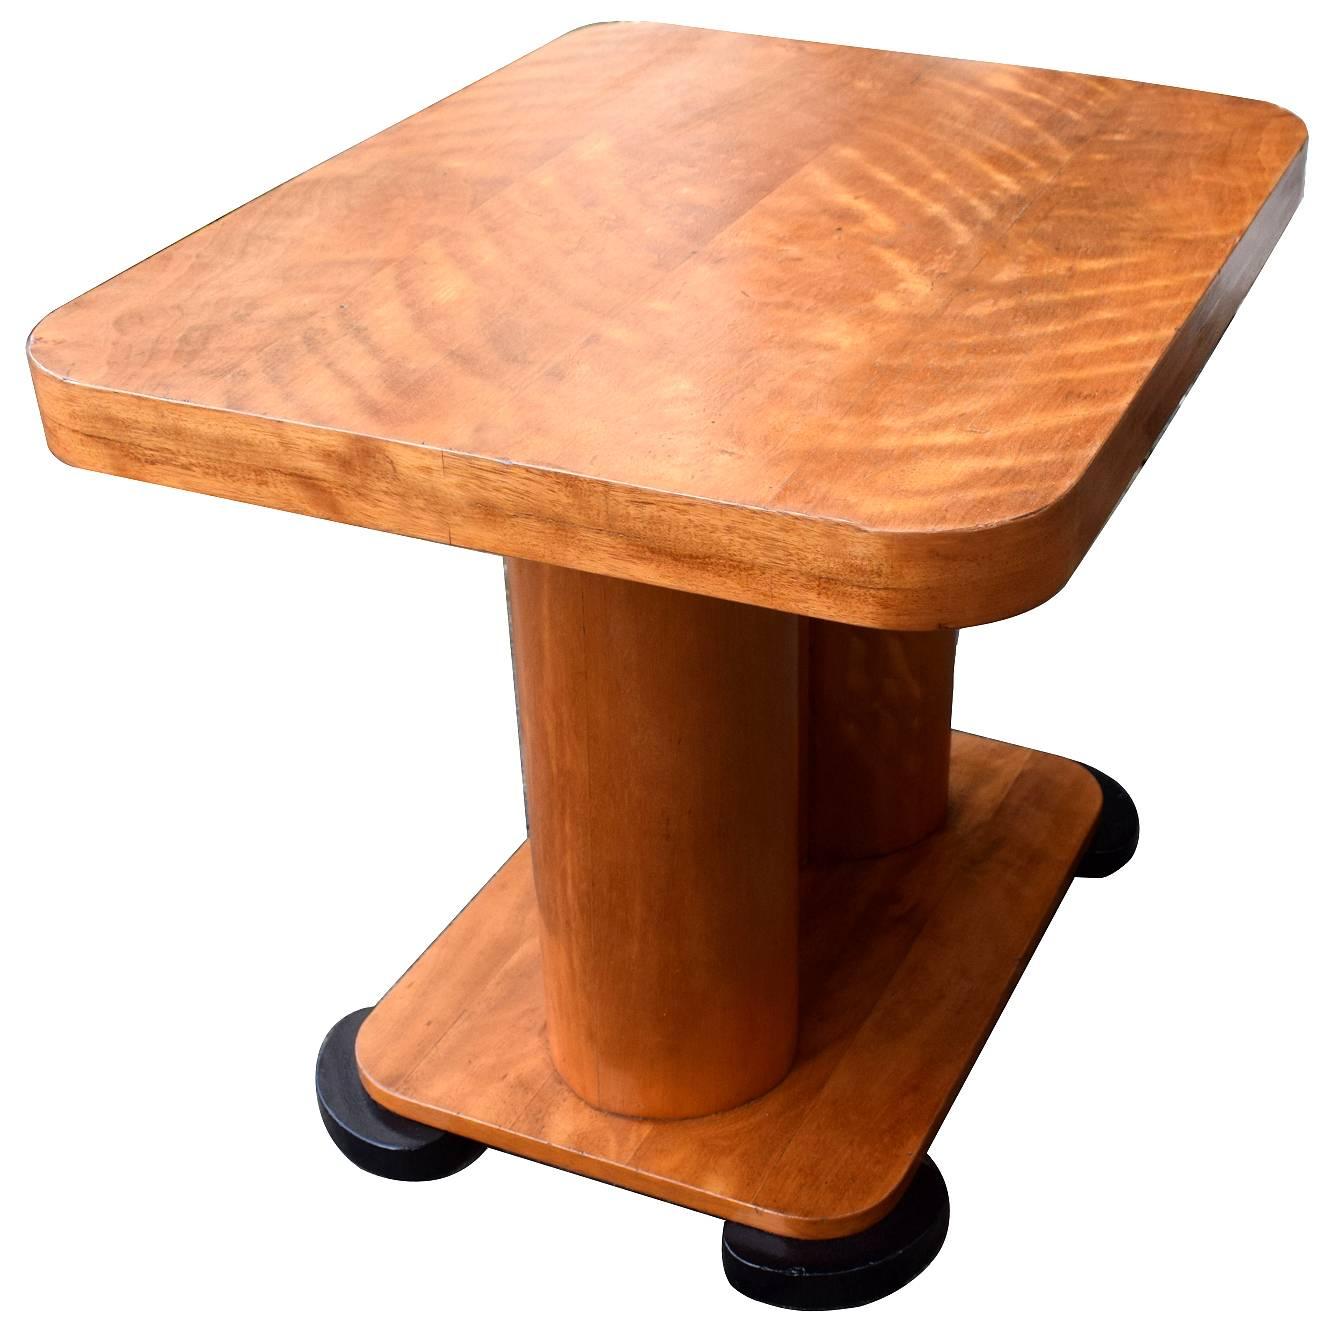 This is a stunning looking table with superb deco design and shape. Ideal size for modern day use and a easily inter-grated blonde light tone satinwood for most rooms. We've had this table taken through our workshops and restored and so comes to you